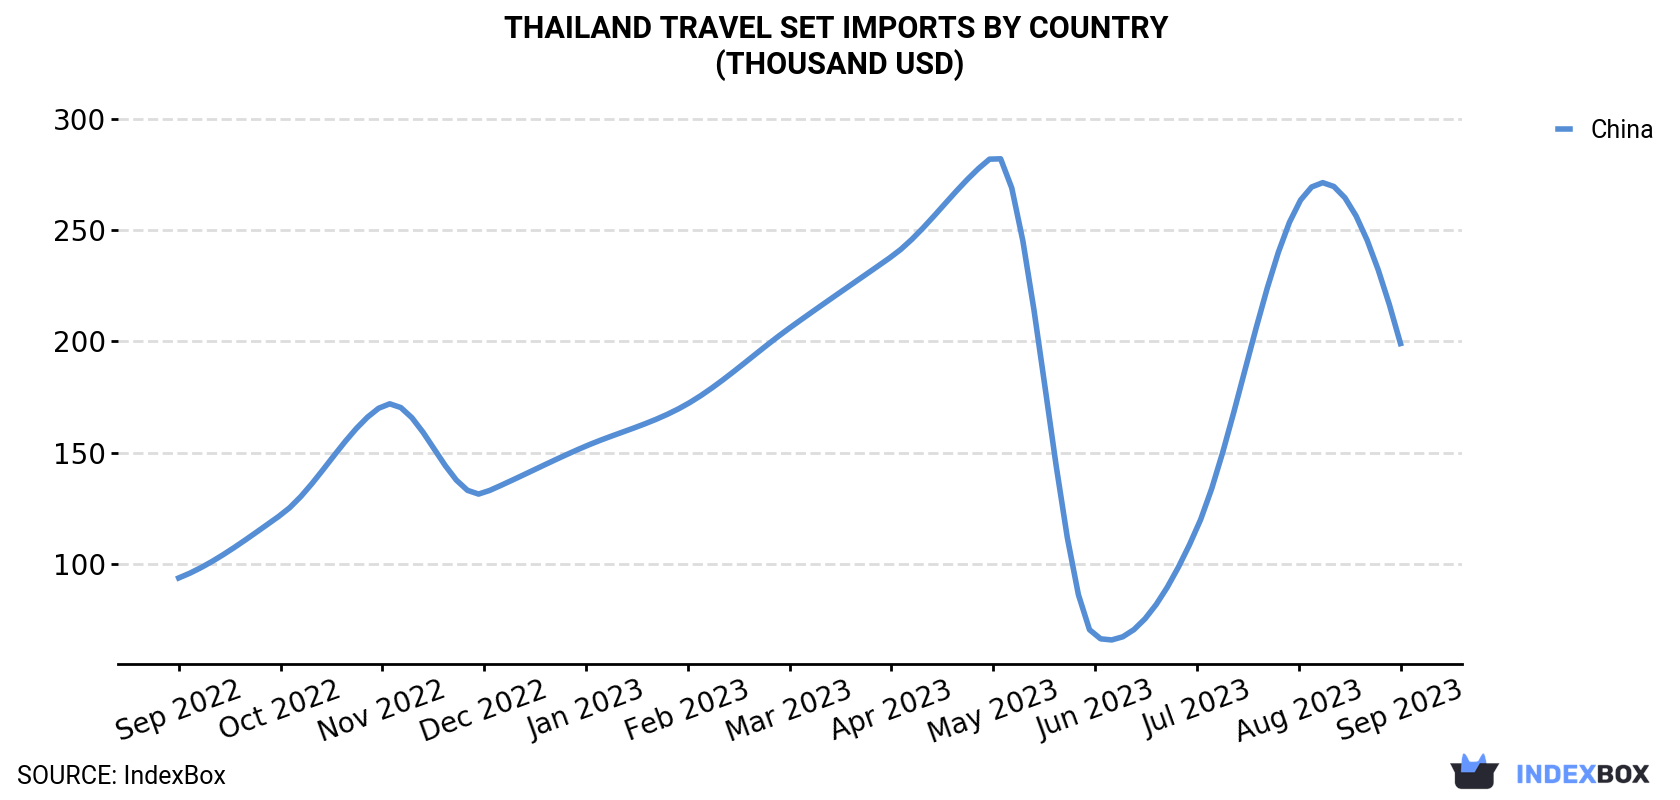 Thailand Travel Set Imports By Country (Thousand USD)